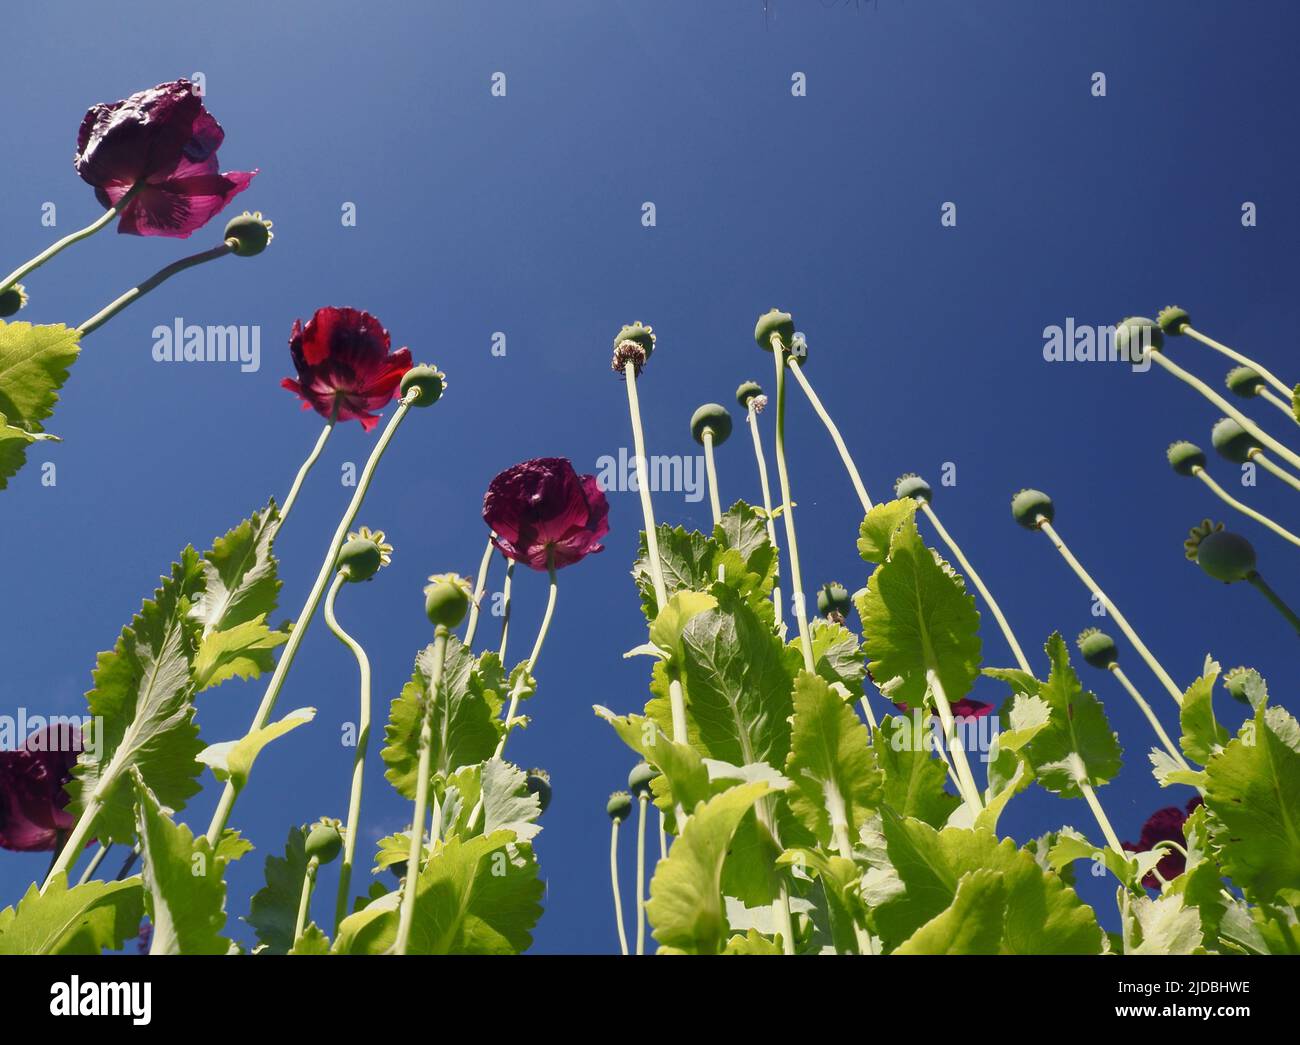 Plum coloured Oriental poppy flowers and seed pods (papaver) reach up towards a deep blue June sky. Stock Photo